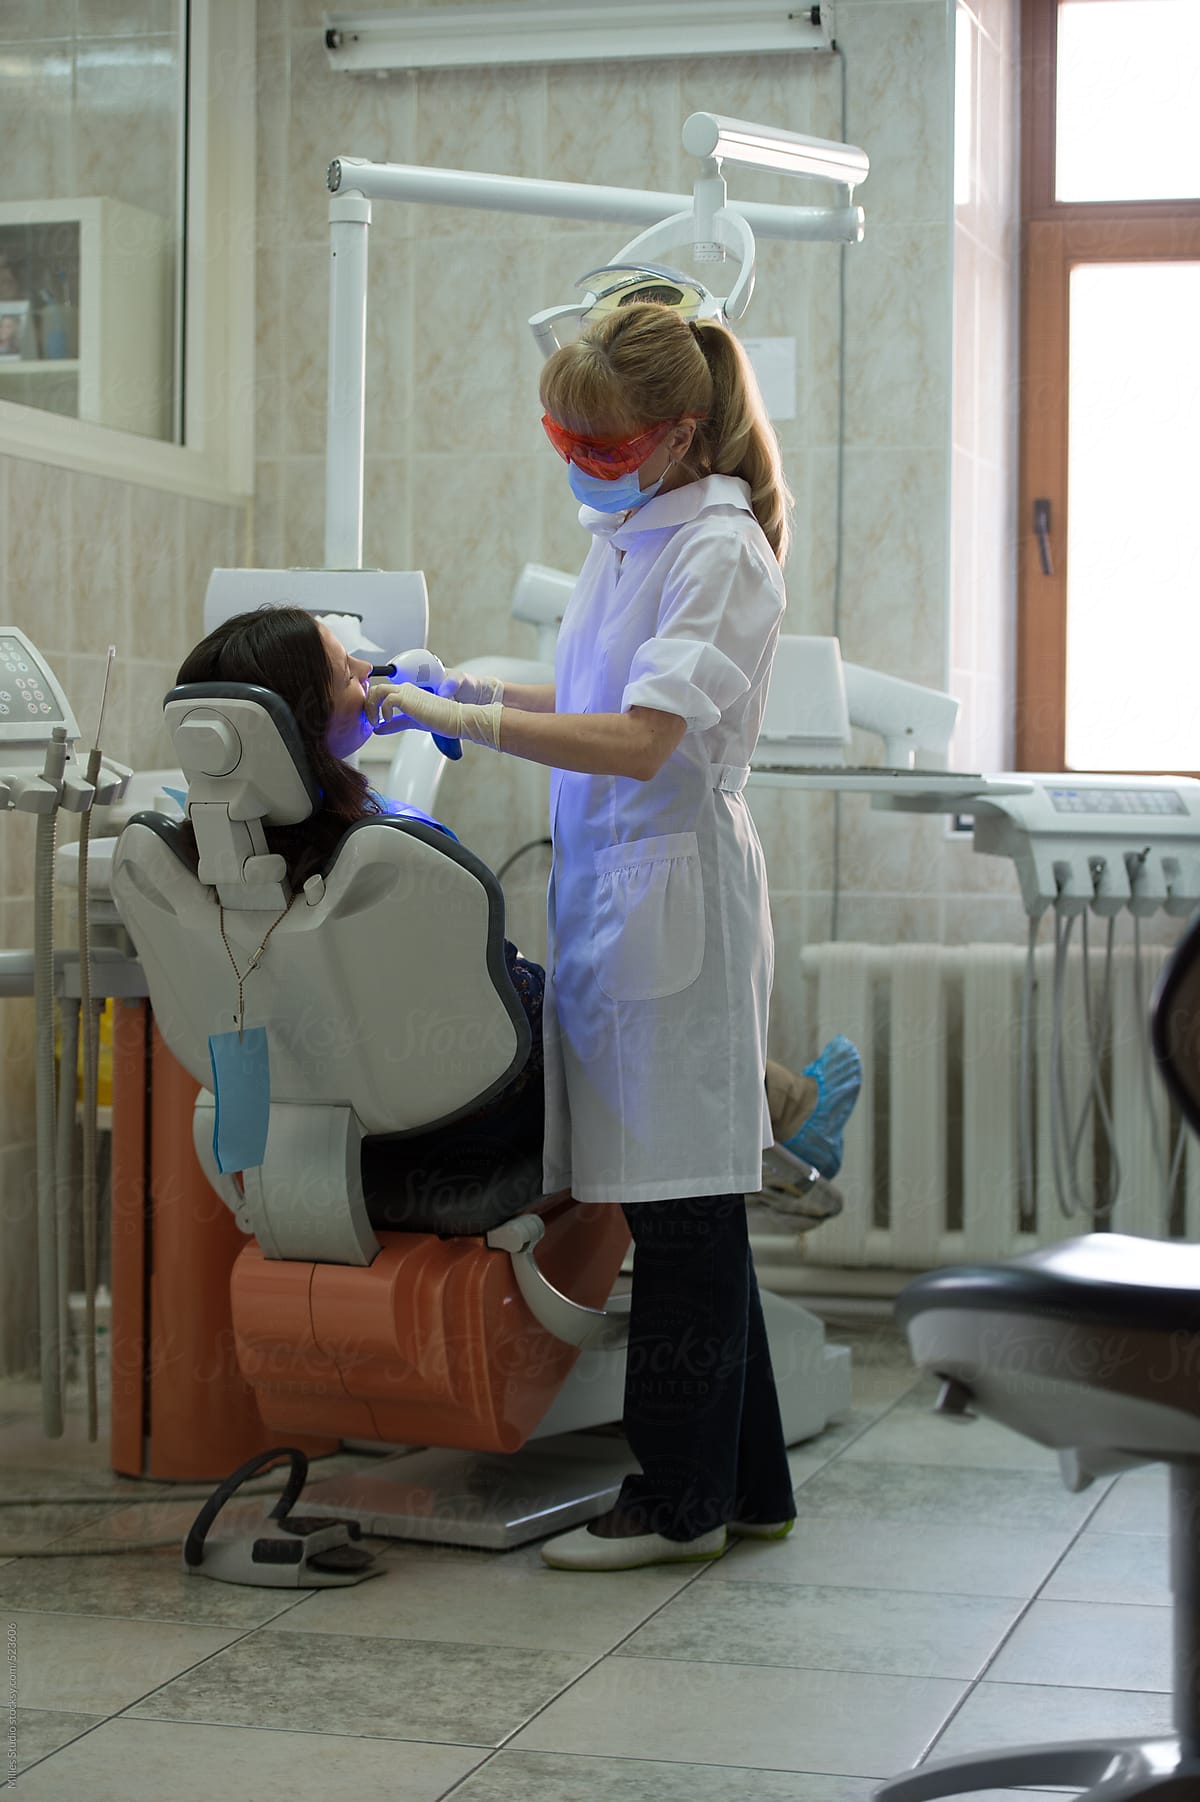 Dentist using ultraviolet curing light equipment to cure patient